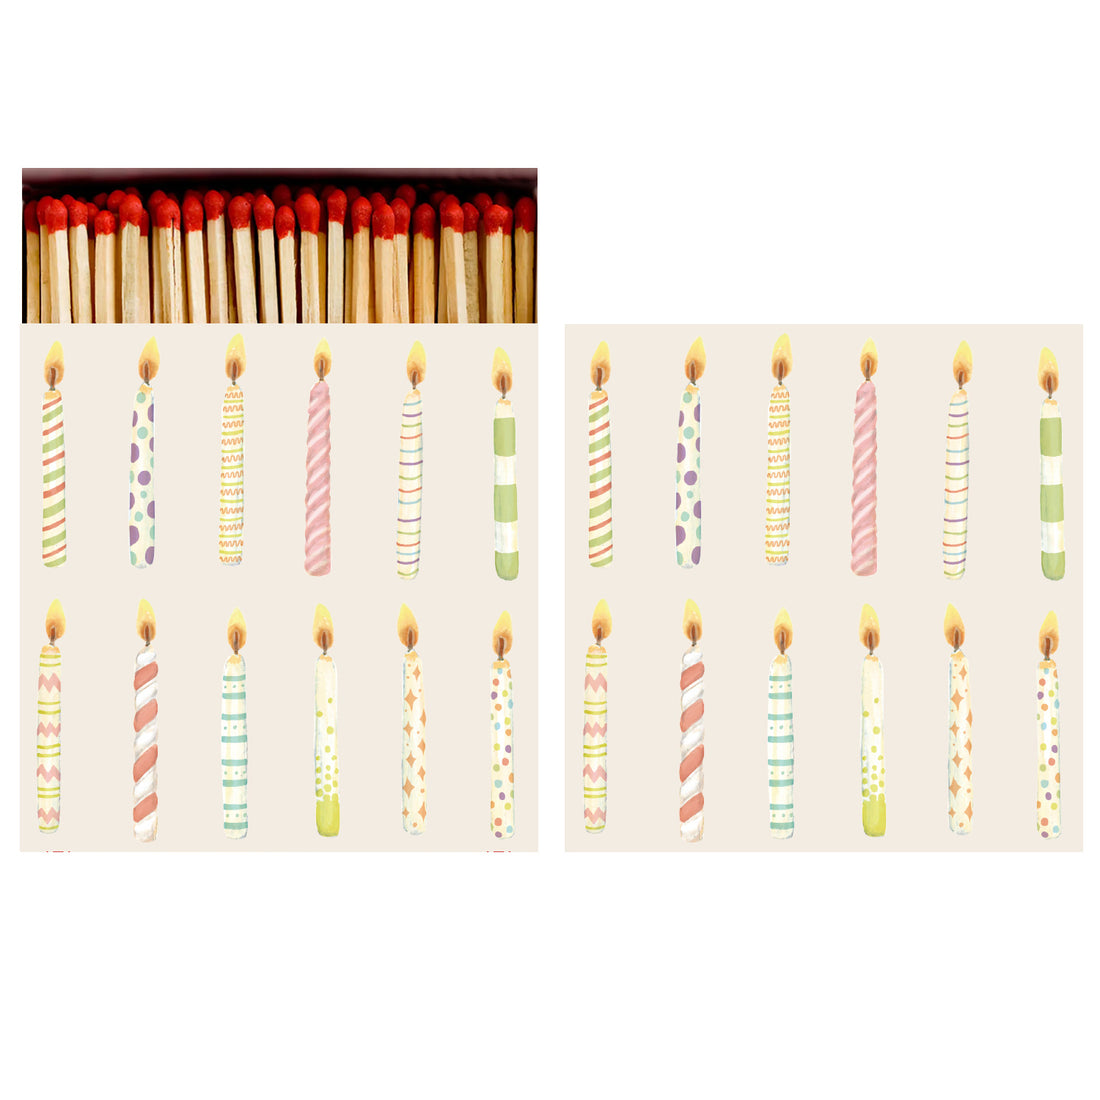 A digital illustration displaying a transformation of Hester &amp; Cook Birthday Candle Matches into birthday candles.